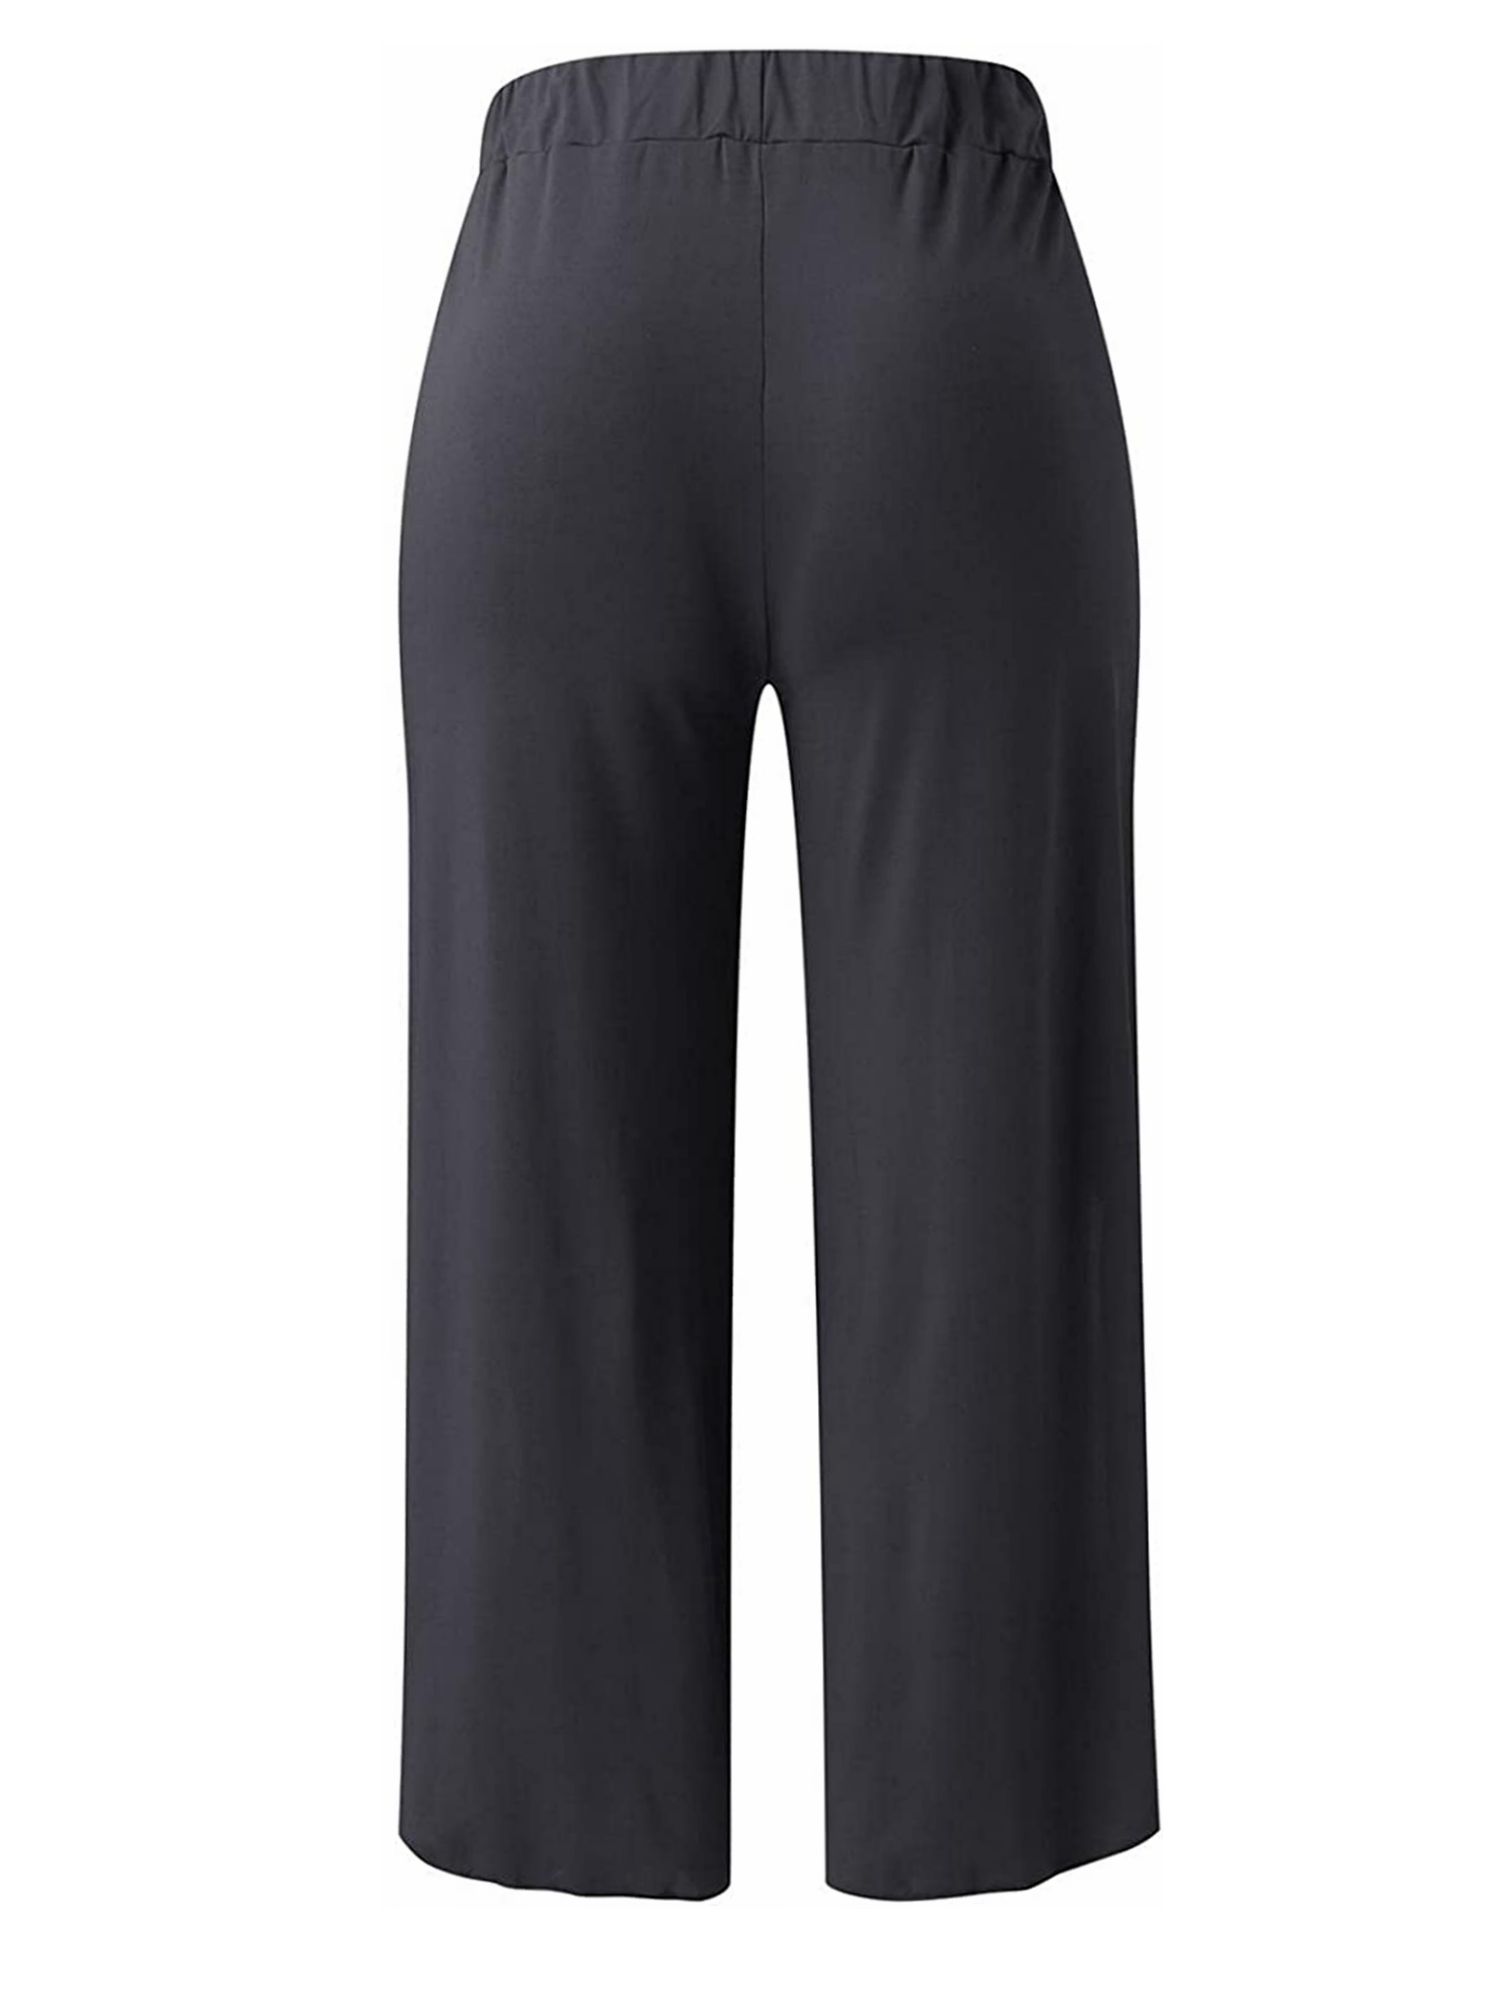 PMUYBHF Yoga Loose Pants for Women Women's Trousers Solid Color Spread Slit  High Waist Slim Wide Leg Casual Pants 4-Jul Wide Leg Pants for Women Plus  Size 